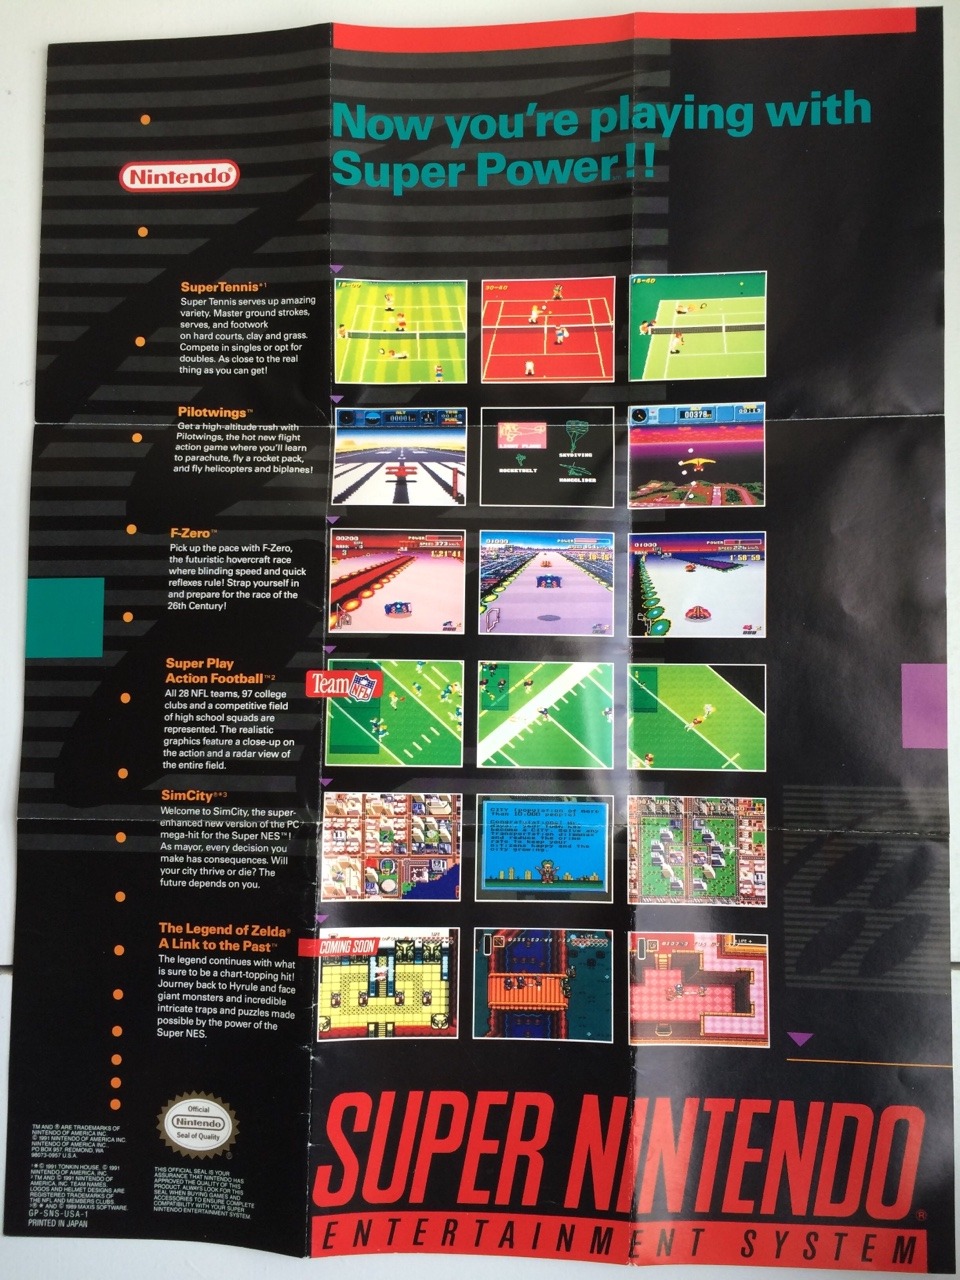 Nintendo flier from 1991 with some early SNES games. Pilotwings, F-Zero, and SimCity were launch releases in August, Super Tennis followed in November, Link to the Past was Apirl ‘92, and Super Play Action Football must have been delayed, not seeing...